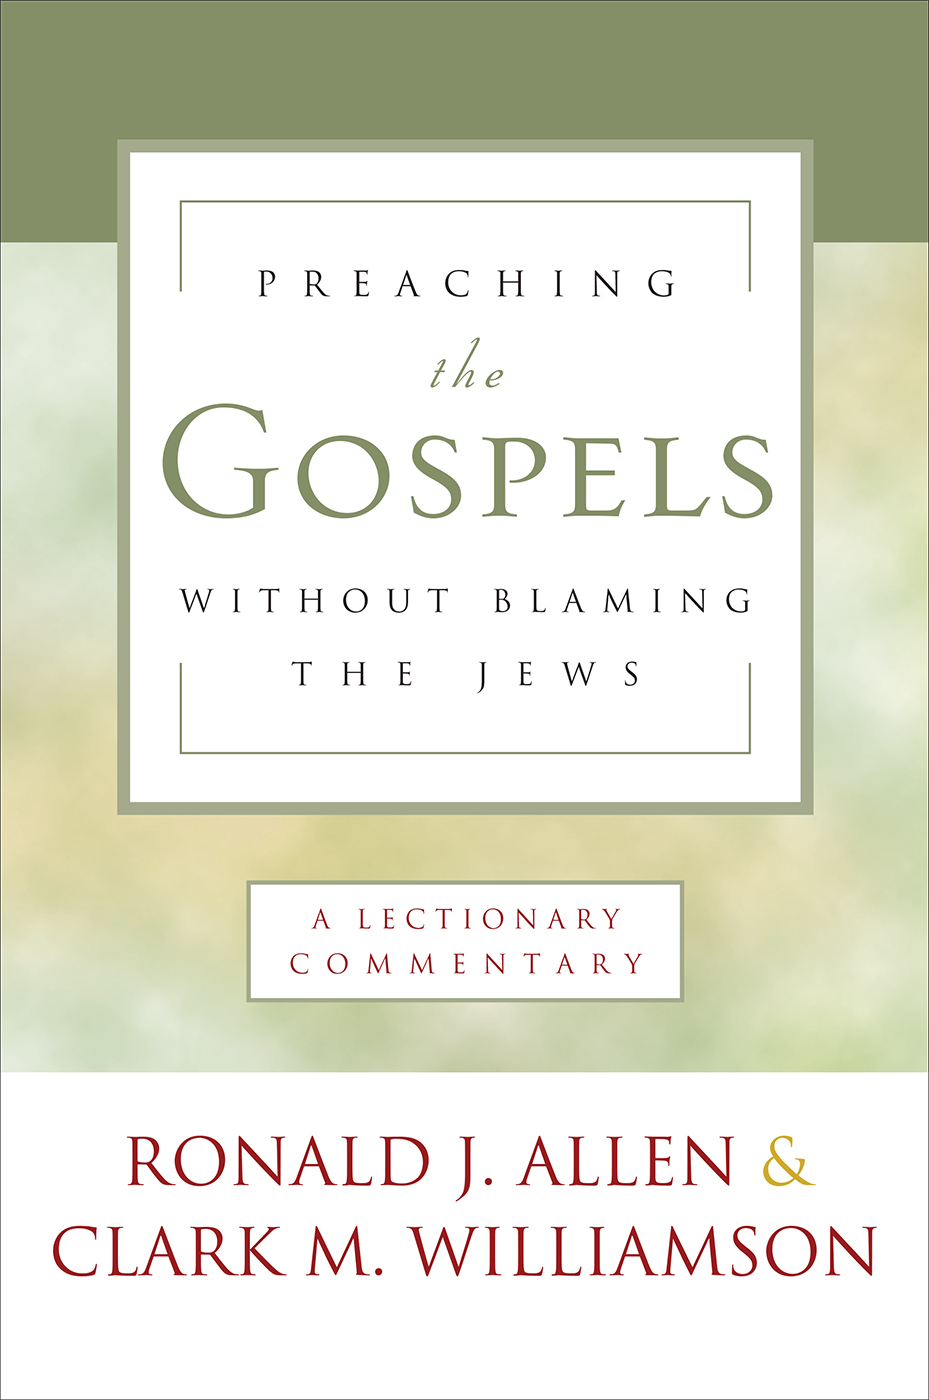 Preaching the Gospels without Blaming the Jews